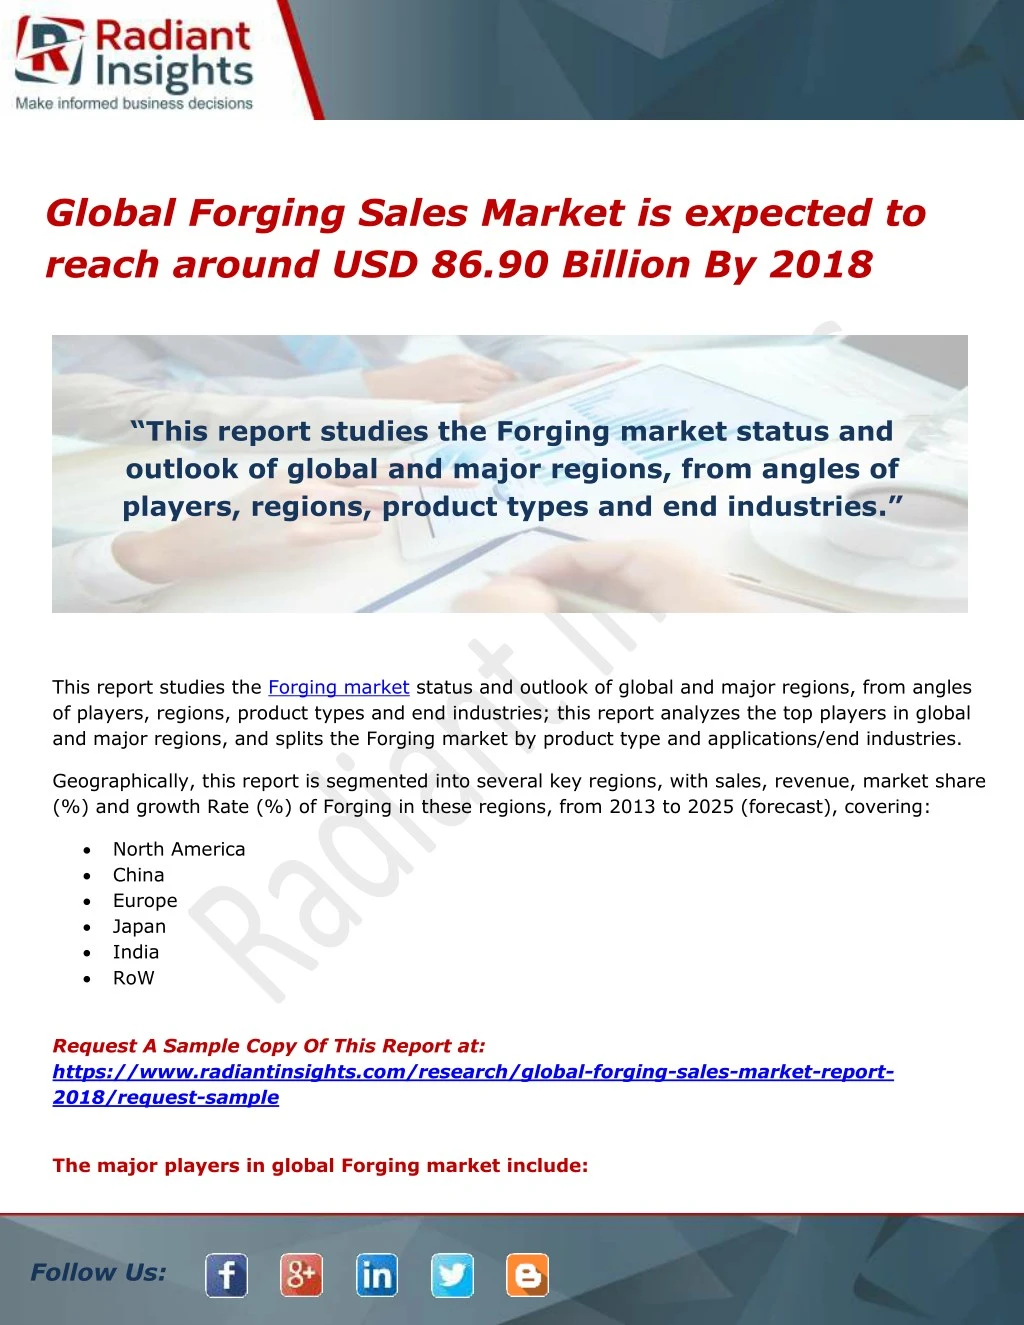 global forging sales market is expected to reach